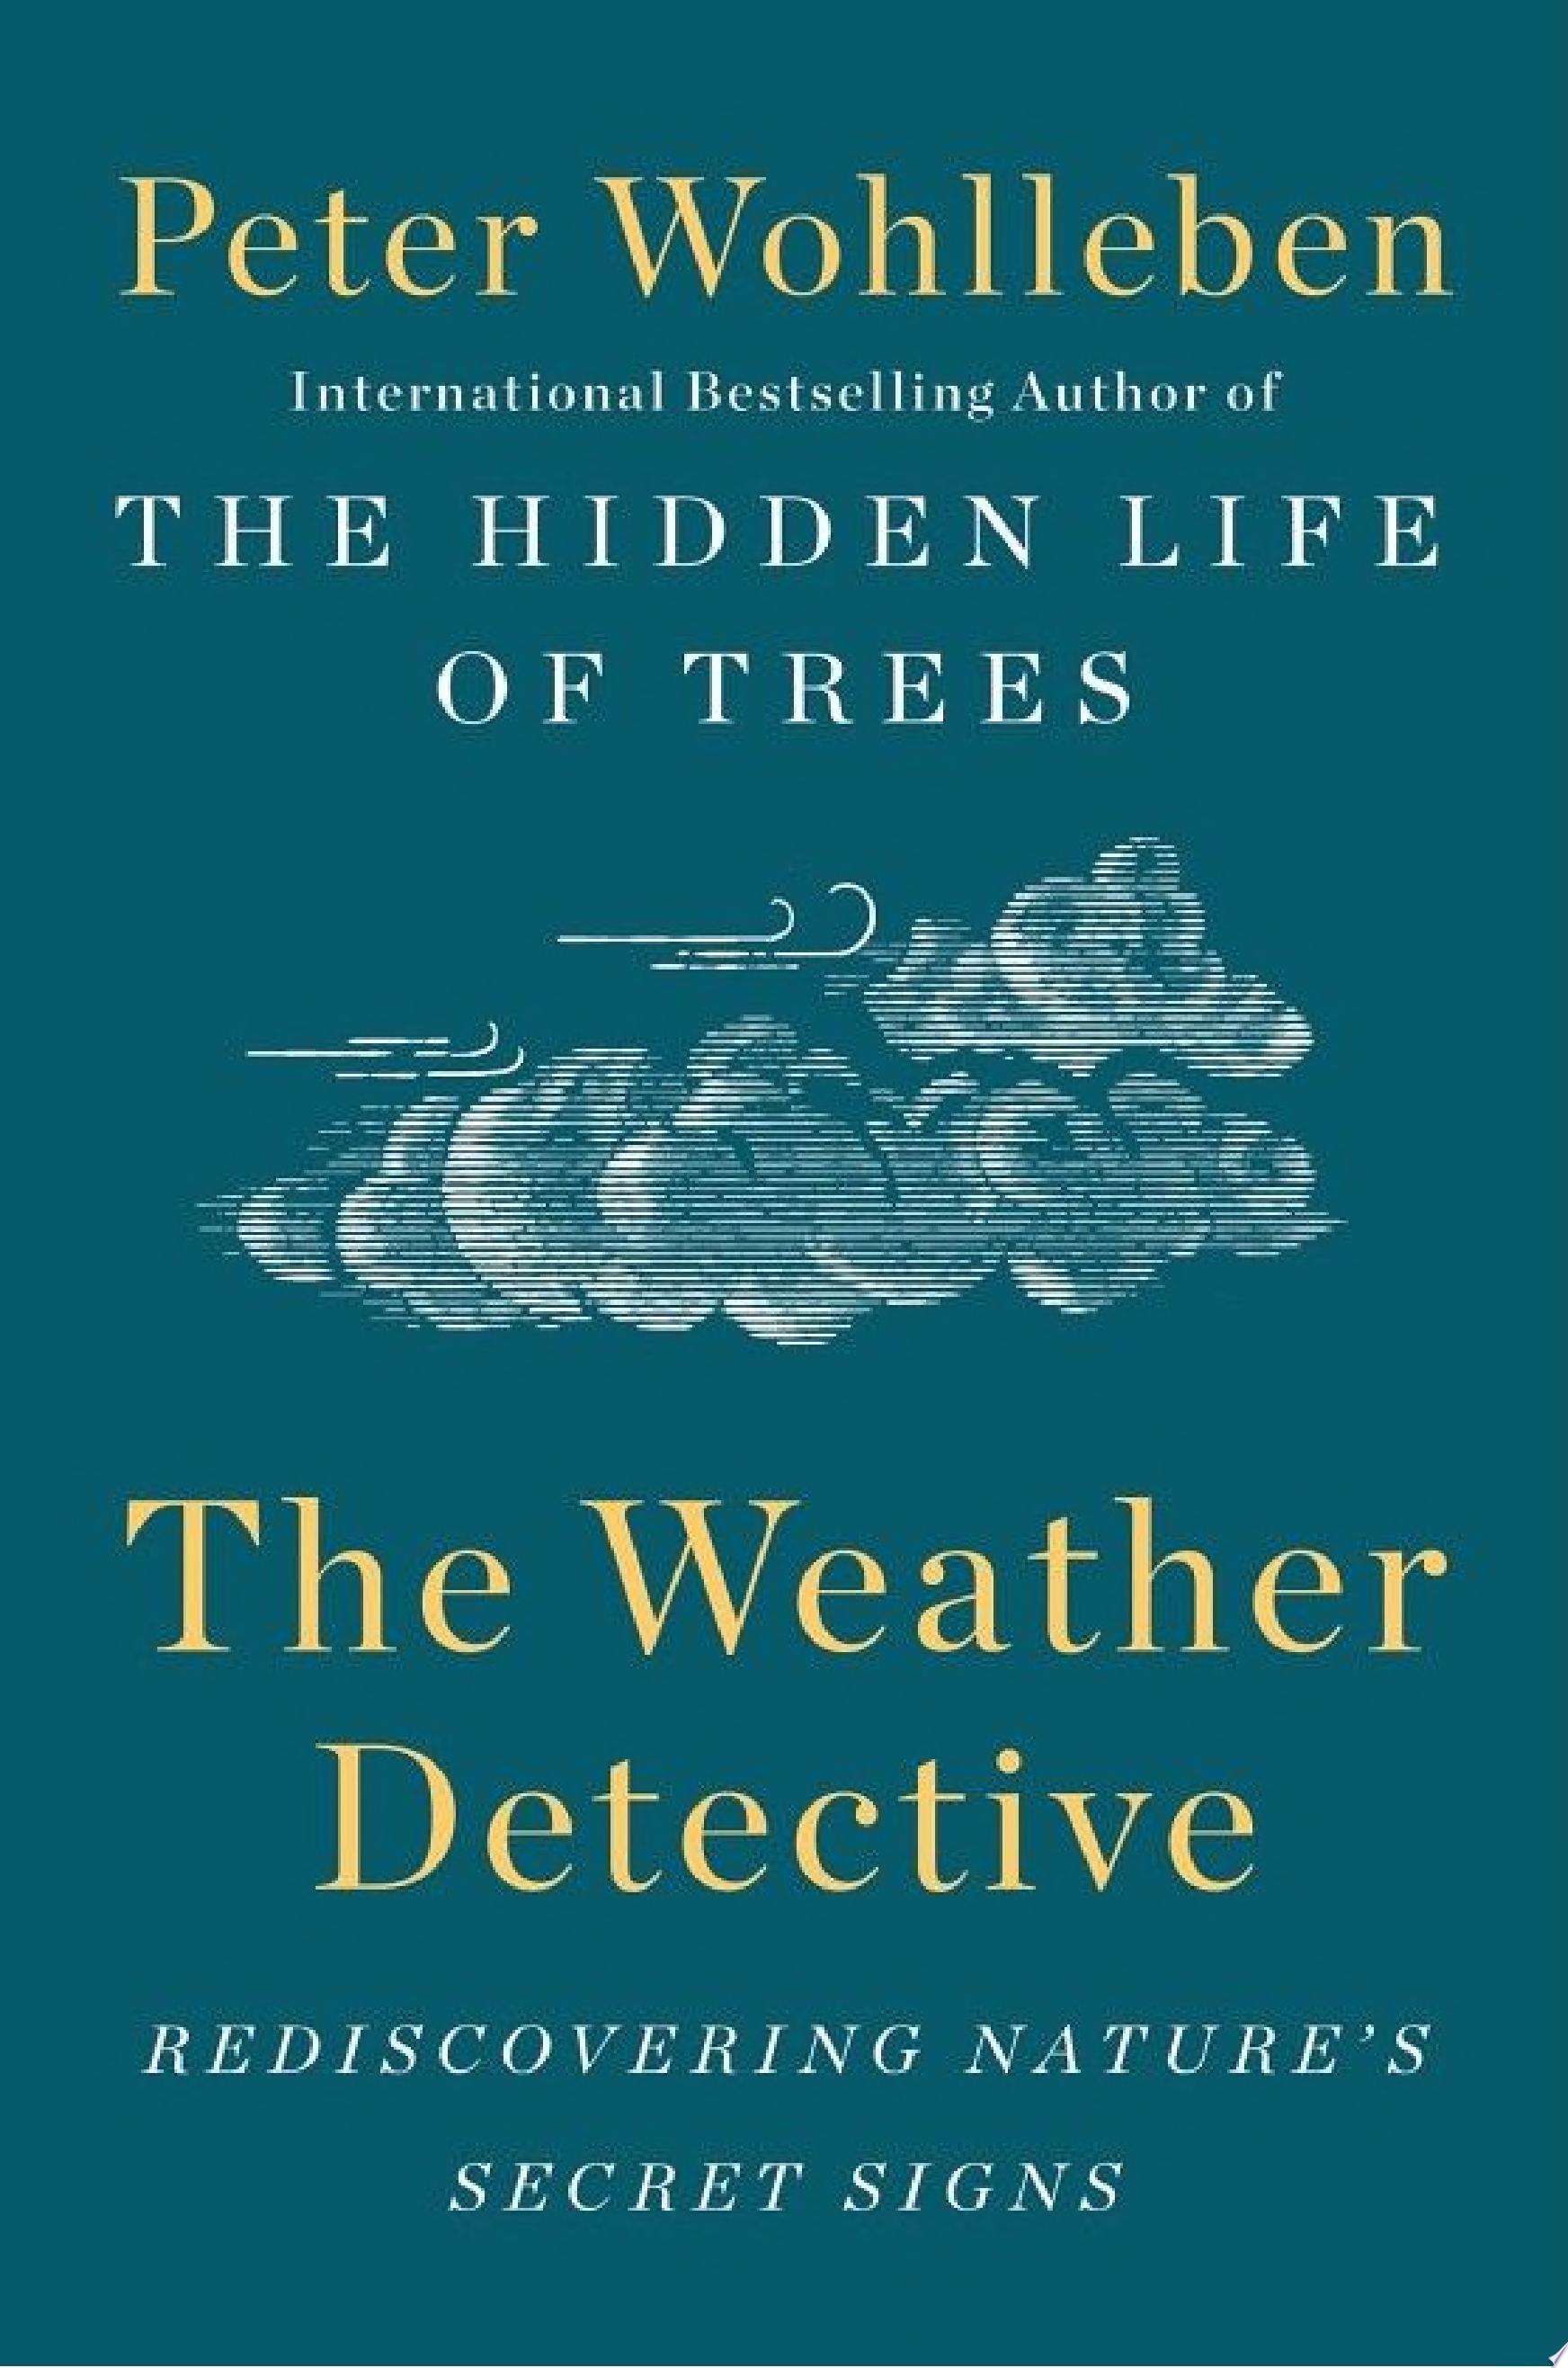 Image for "The Weather Detective"